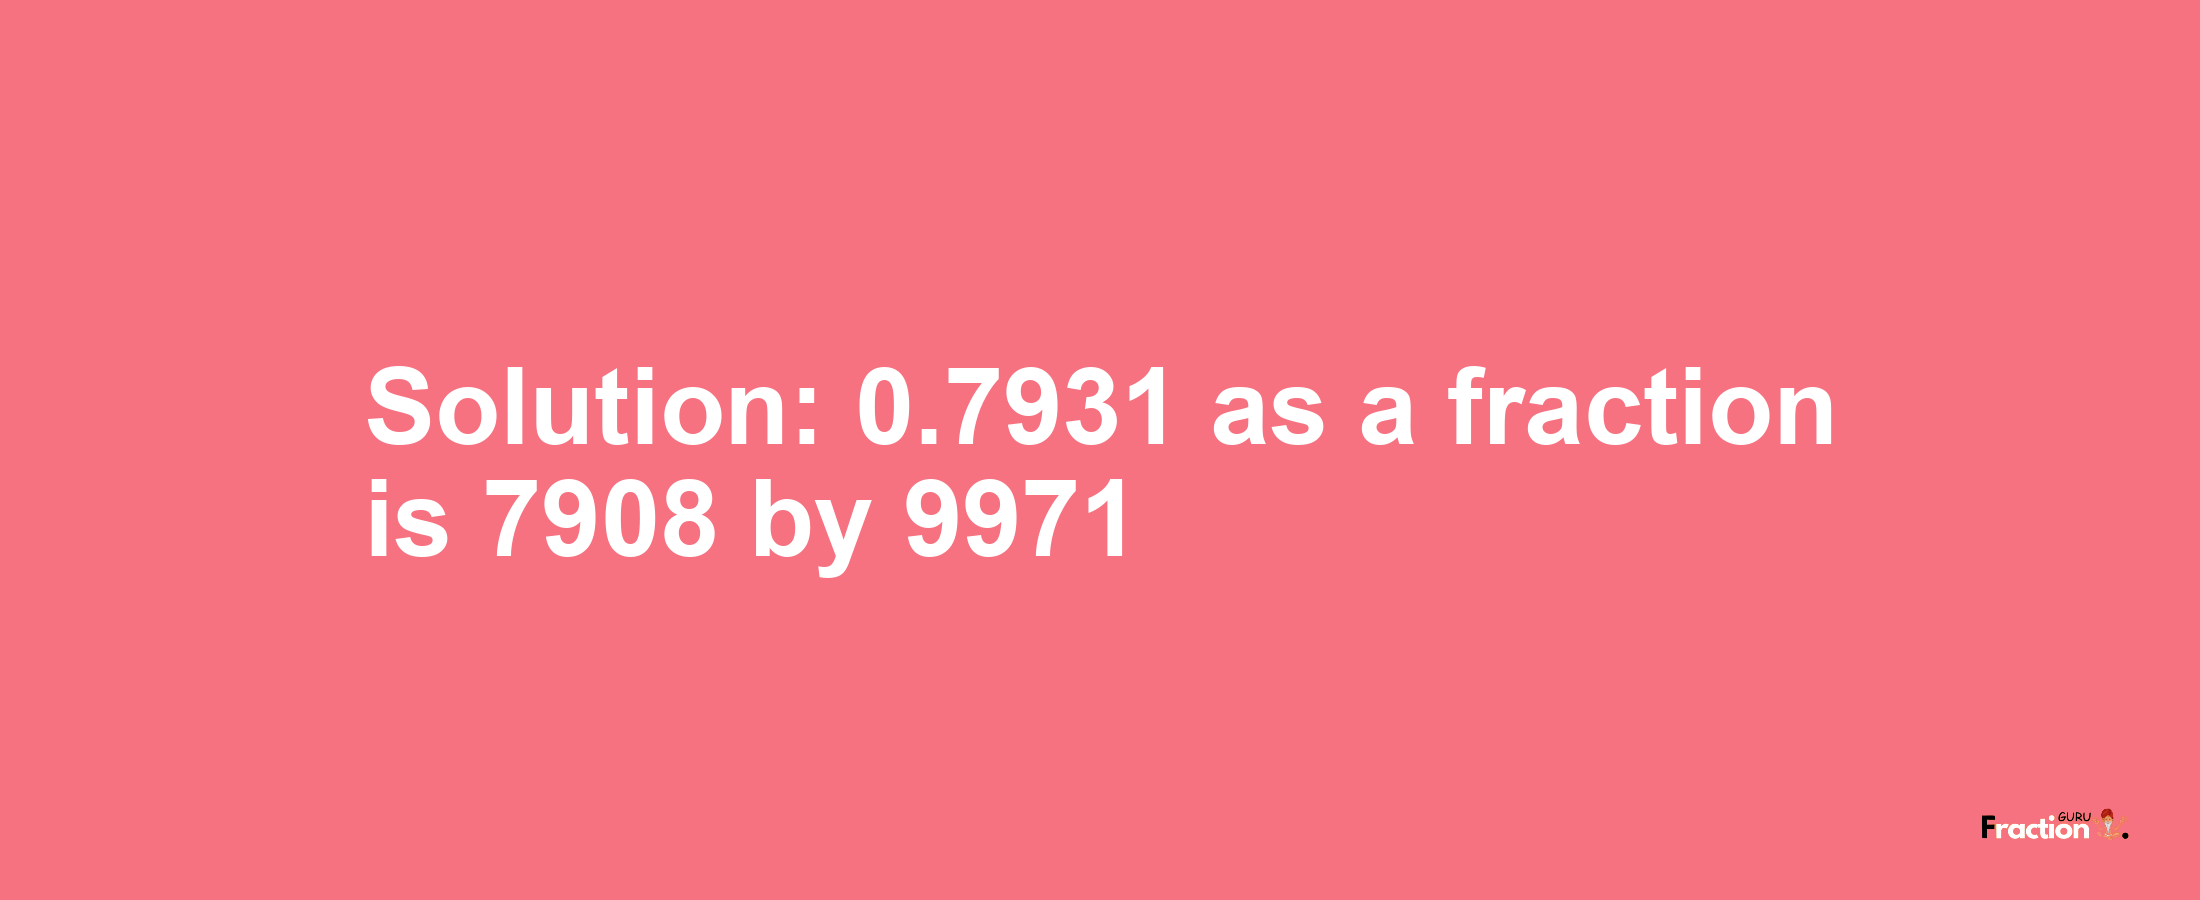 Solution:0.7931 as a fraction is 7908/9971